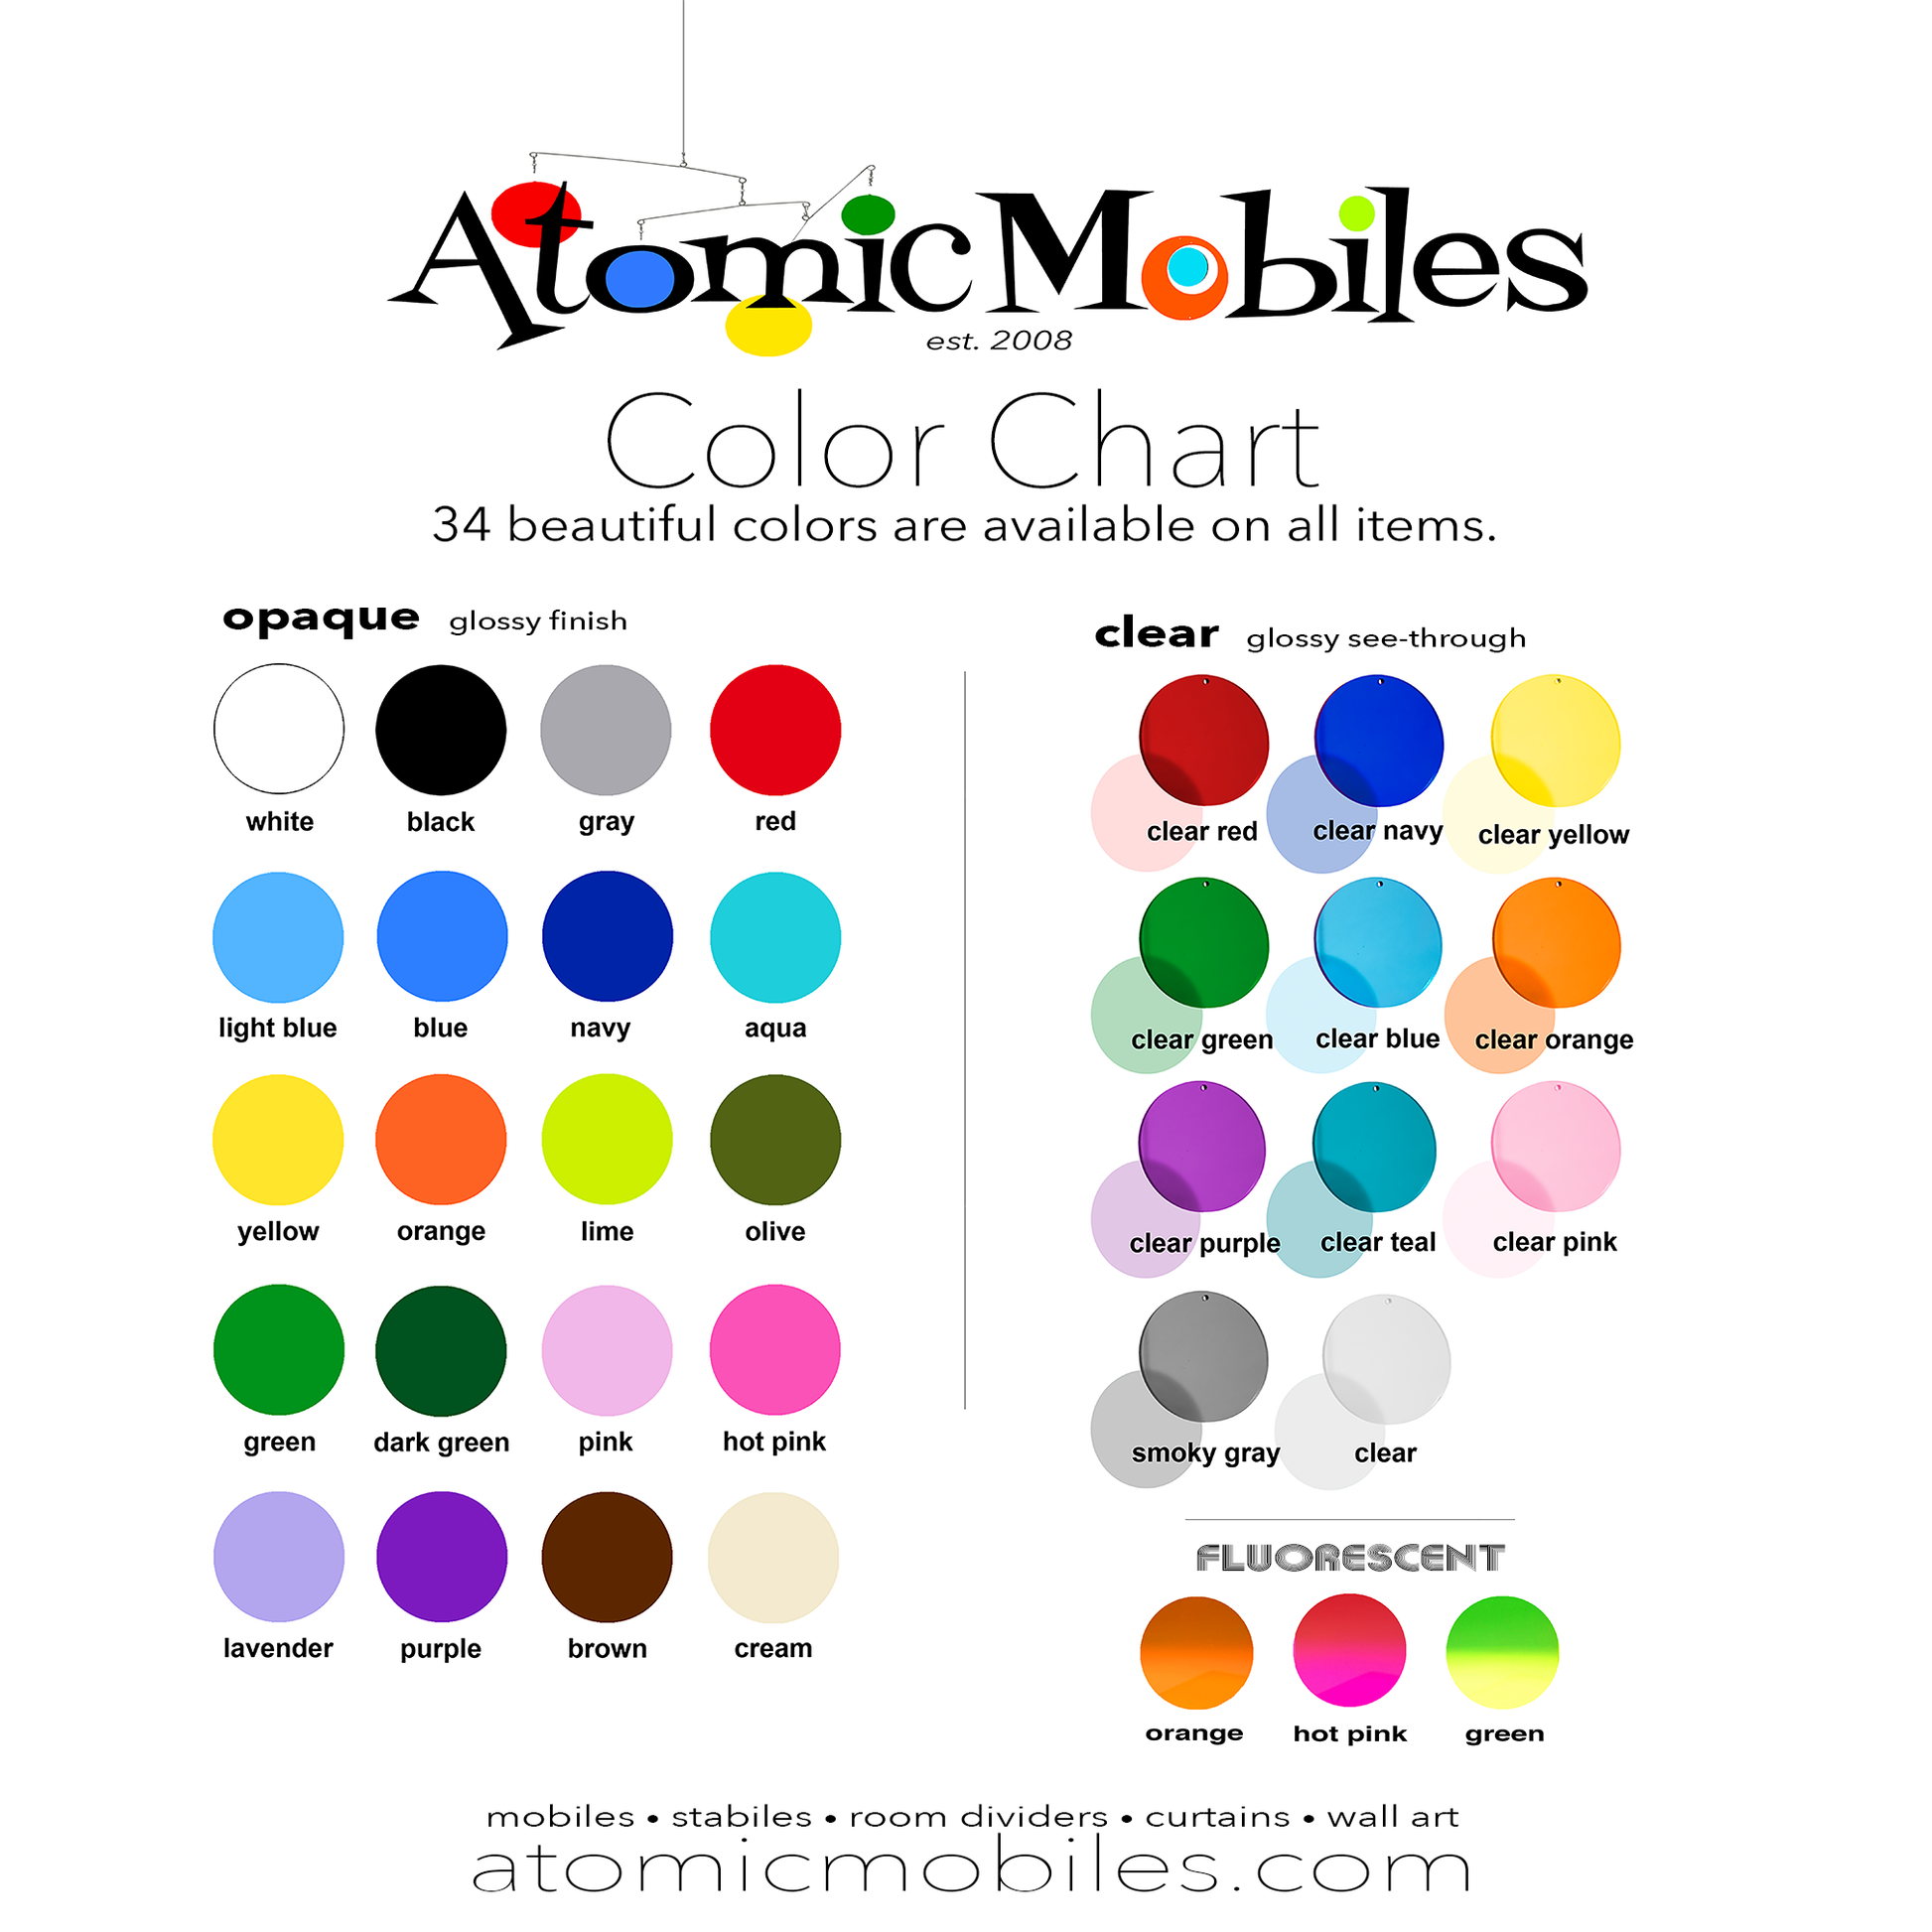 Atomic Mobiles Color Chart of 34 acrylic colors for The Atomic Mobile